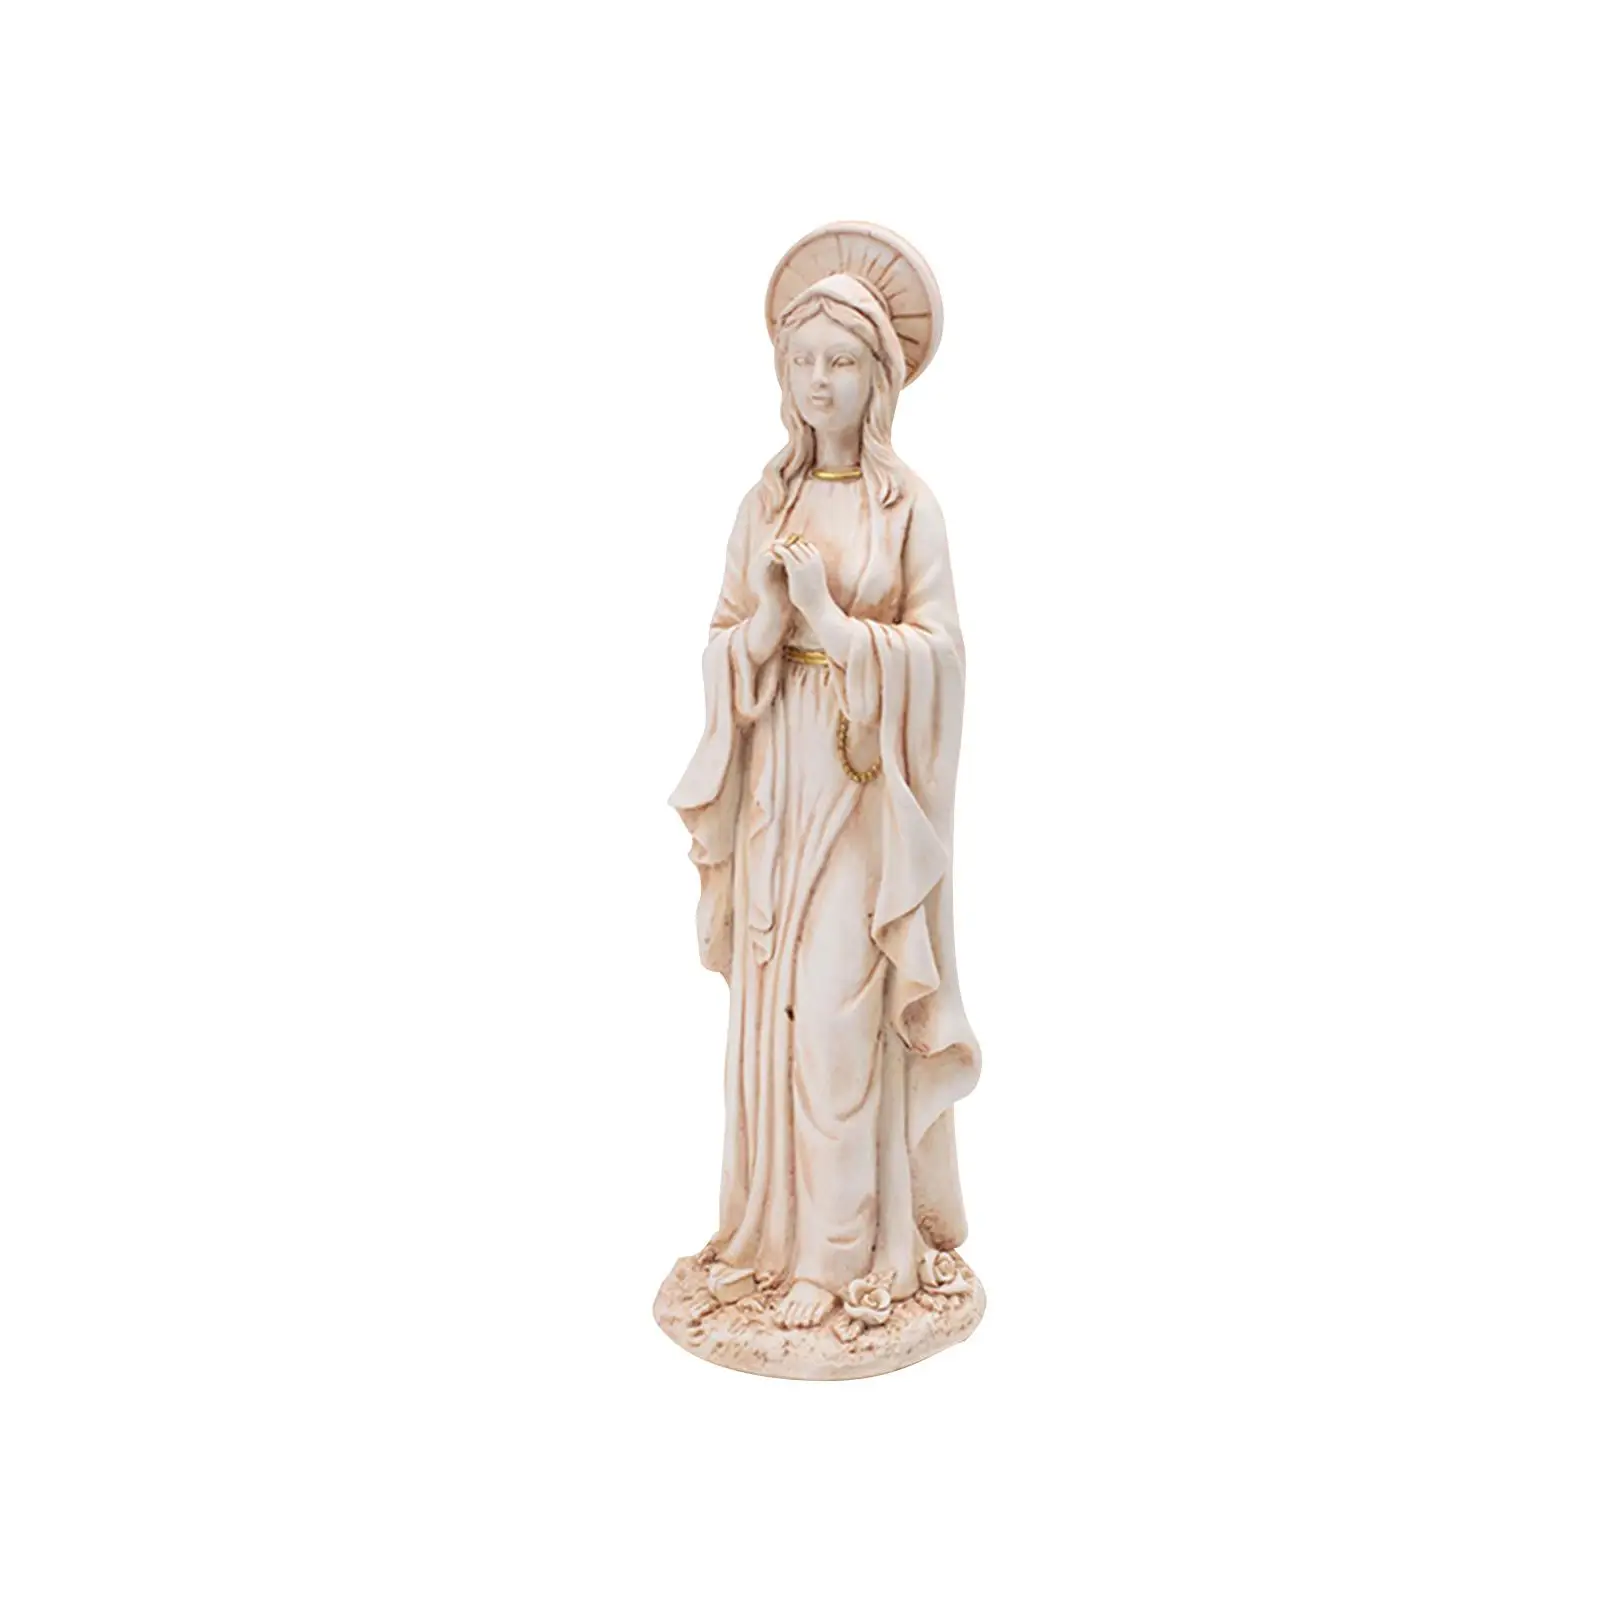 Virgin Mother Mary Statue Christian Decorative for Wedding Home Collectible